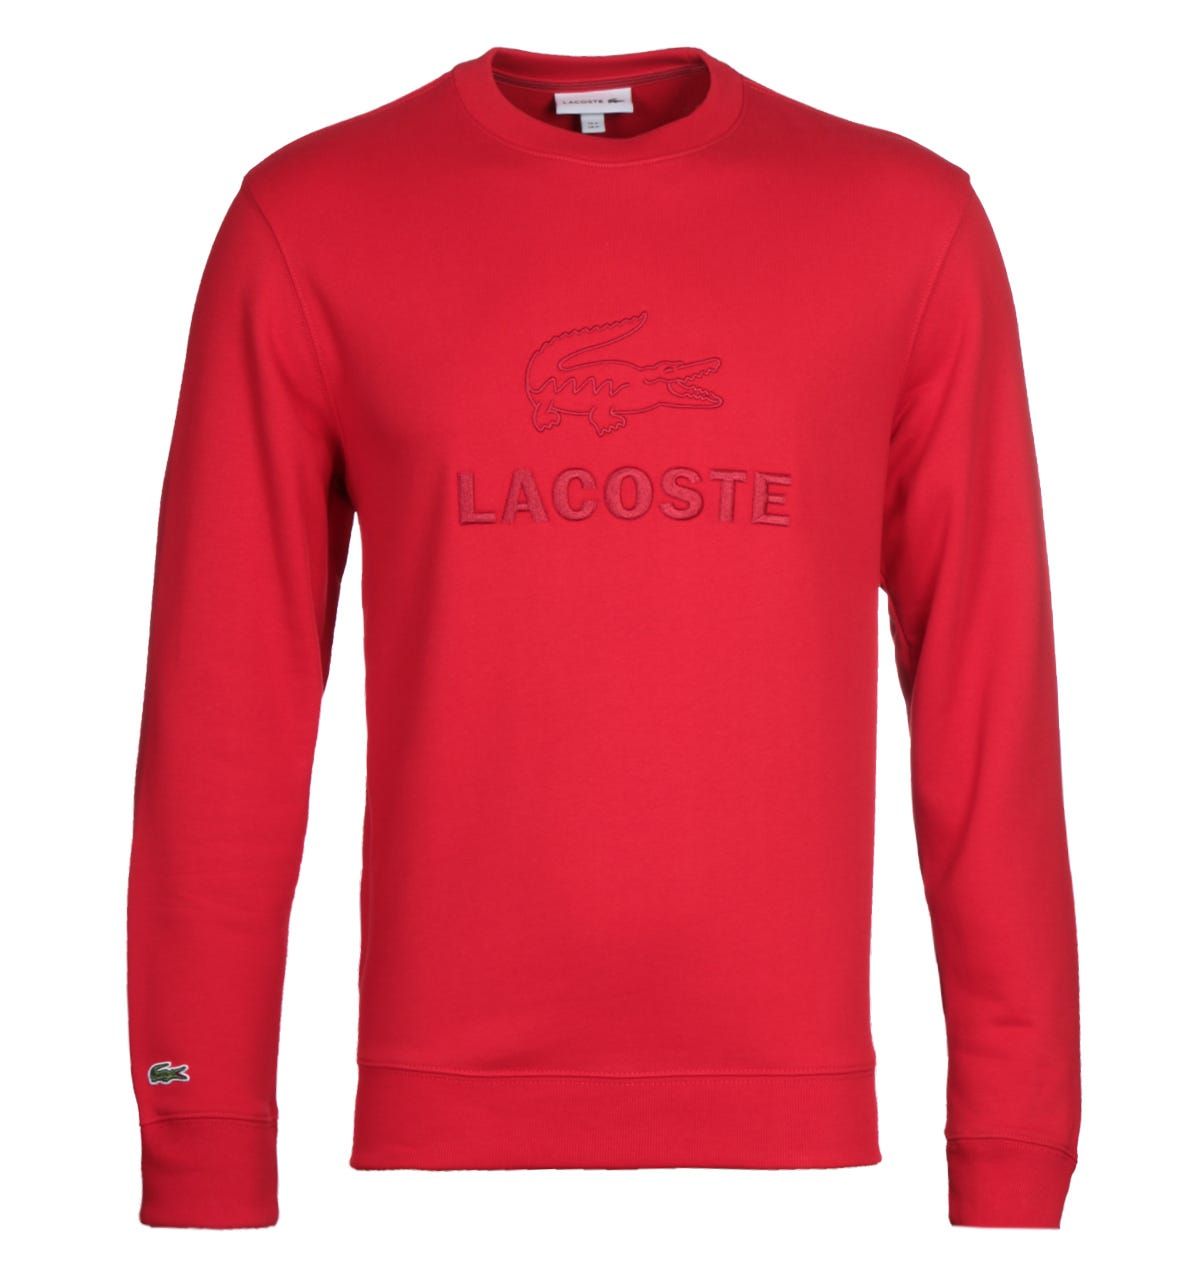 <p>A pique cotton composition crafted by Lacoste. The Lacoste Homme Red Sweatshirt is fitted with a crew neck collar line and ribbed trims for a lightweight feeling of comfort. The classic silhouette offers versatility, with the design being finished with the Lacoste logo embroidered on the chest.</p><ul><li>Cotton composition</li><li>Crew neck</li><li>Ribbed trims</li><li>Tonal stitching</li><li>Lacoste logo embroidered on chest</li></ul><p>Style & Fit:</p><ul><li>Regular fit</li><li>Fits true to size</li></ul><p>Fabric Composition & Care:</p><ul><li>100% Cotton</li><li>Machine wash</li></ul>